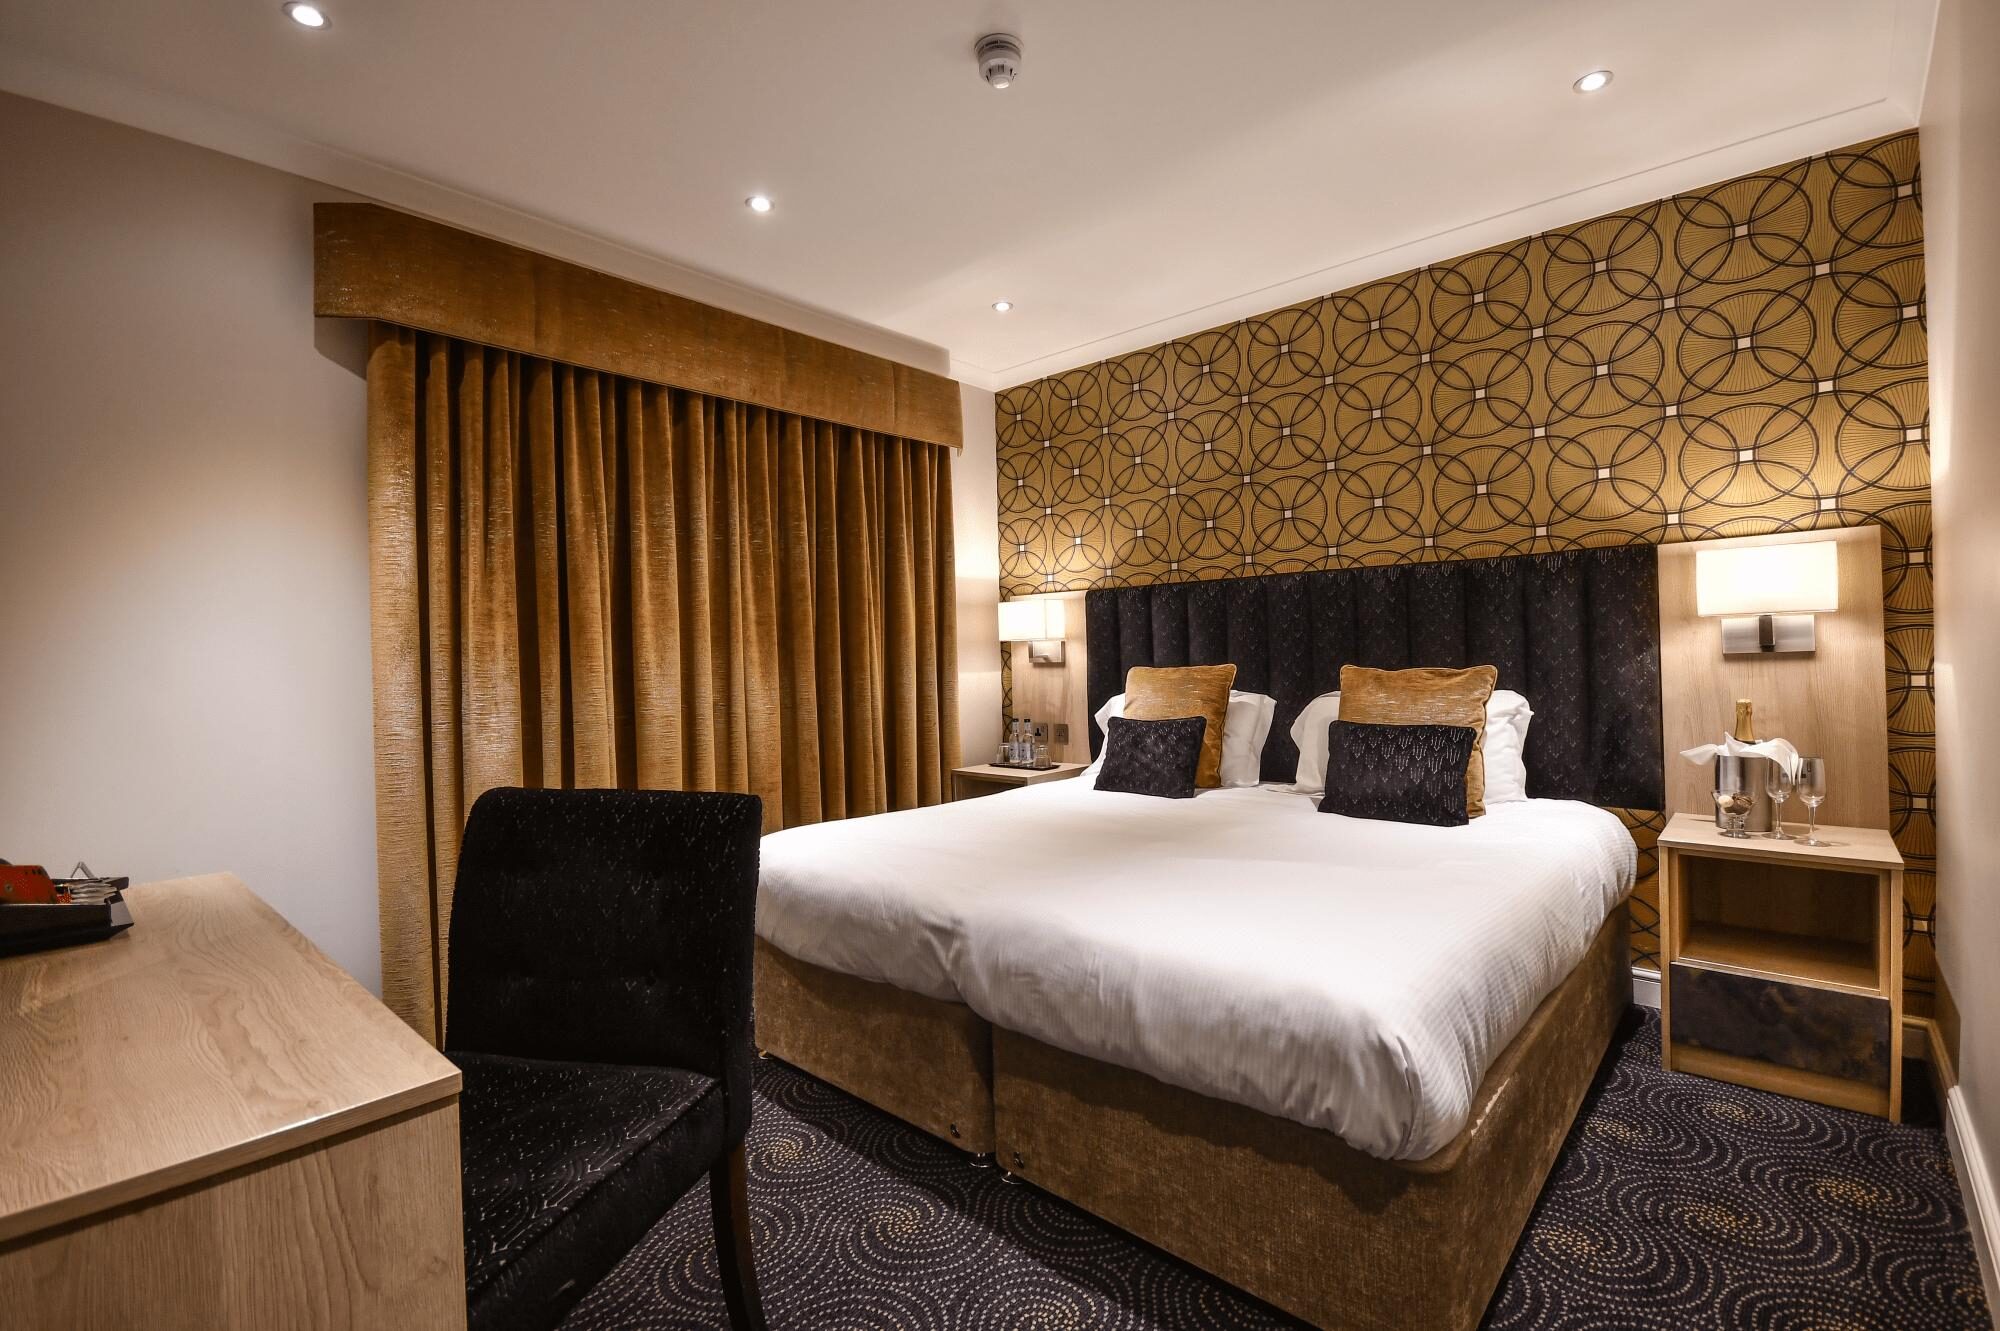 Boutique Hotel Rooms: Standard Double Room